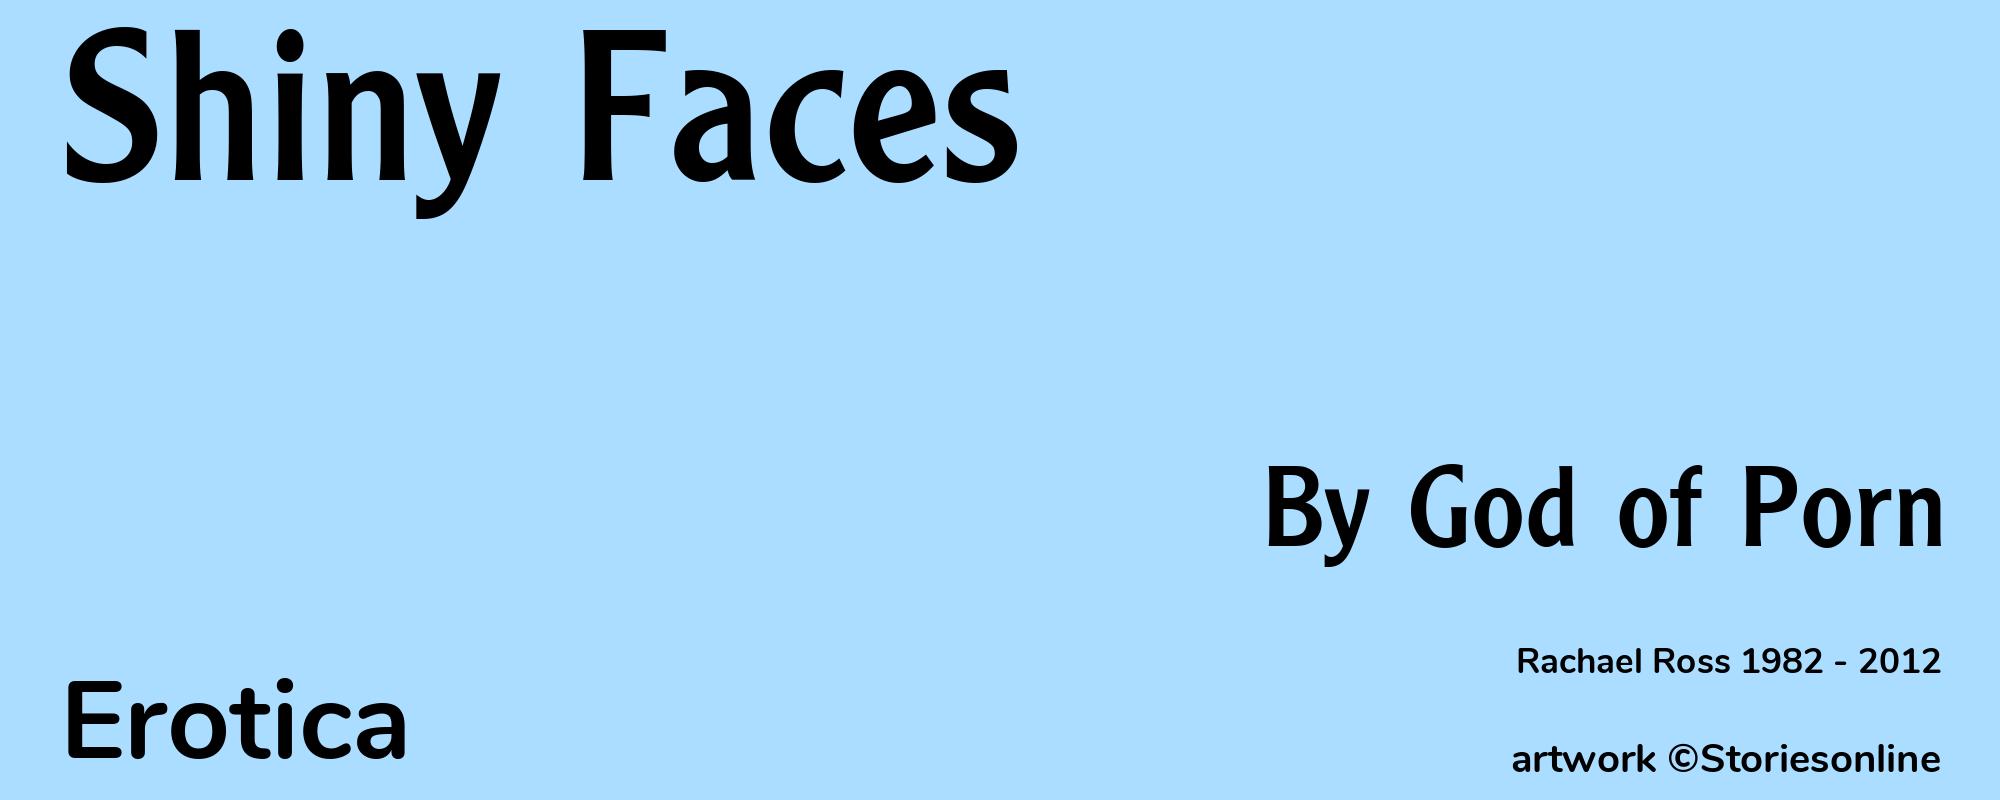 Shiny Faces - Cover